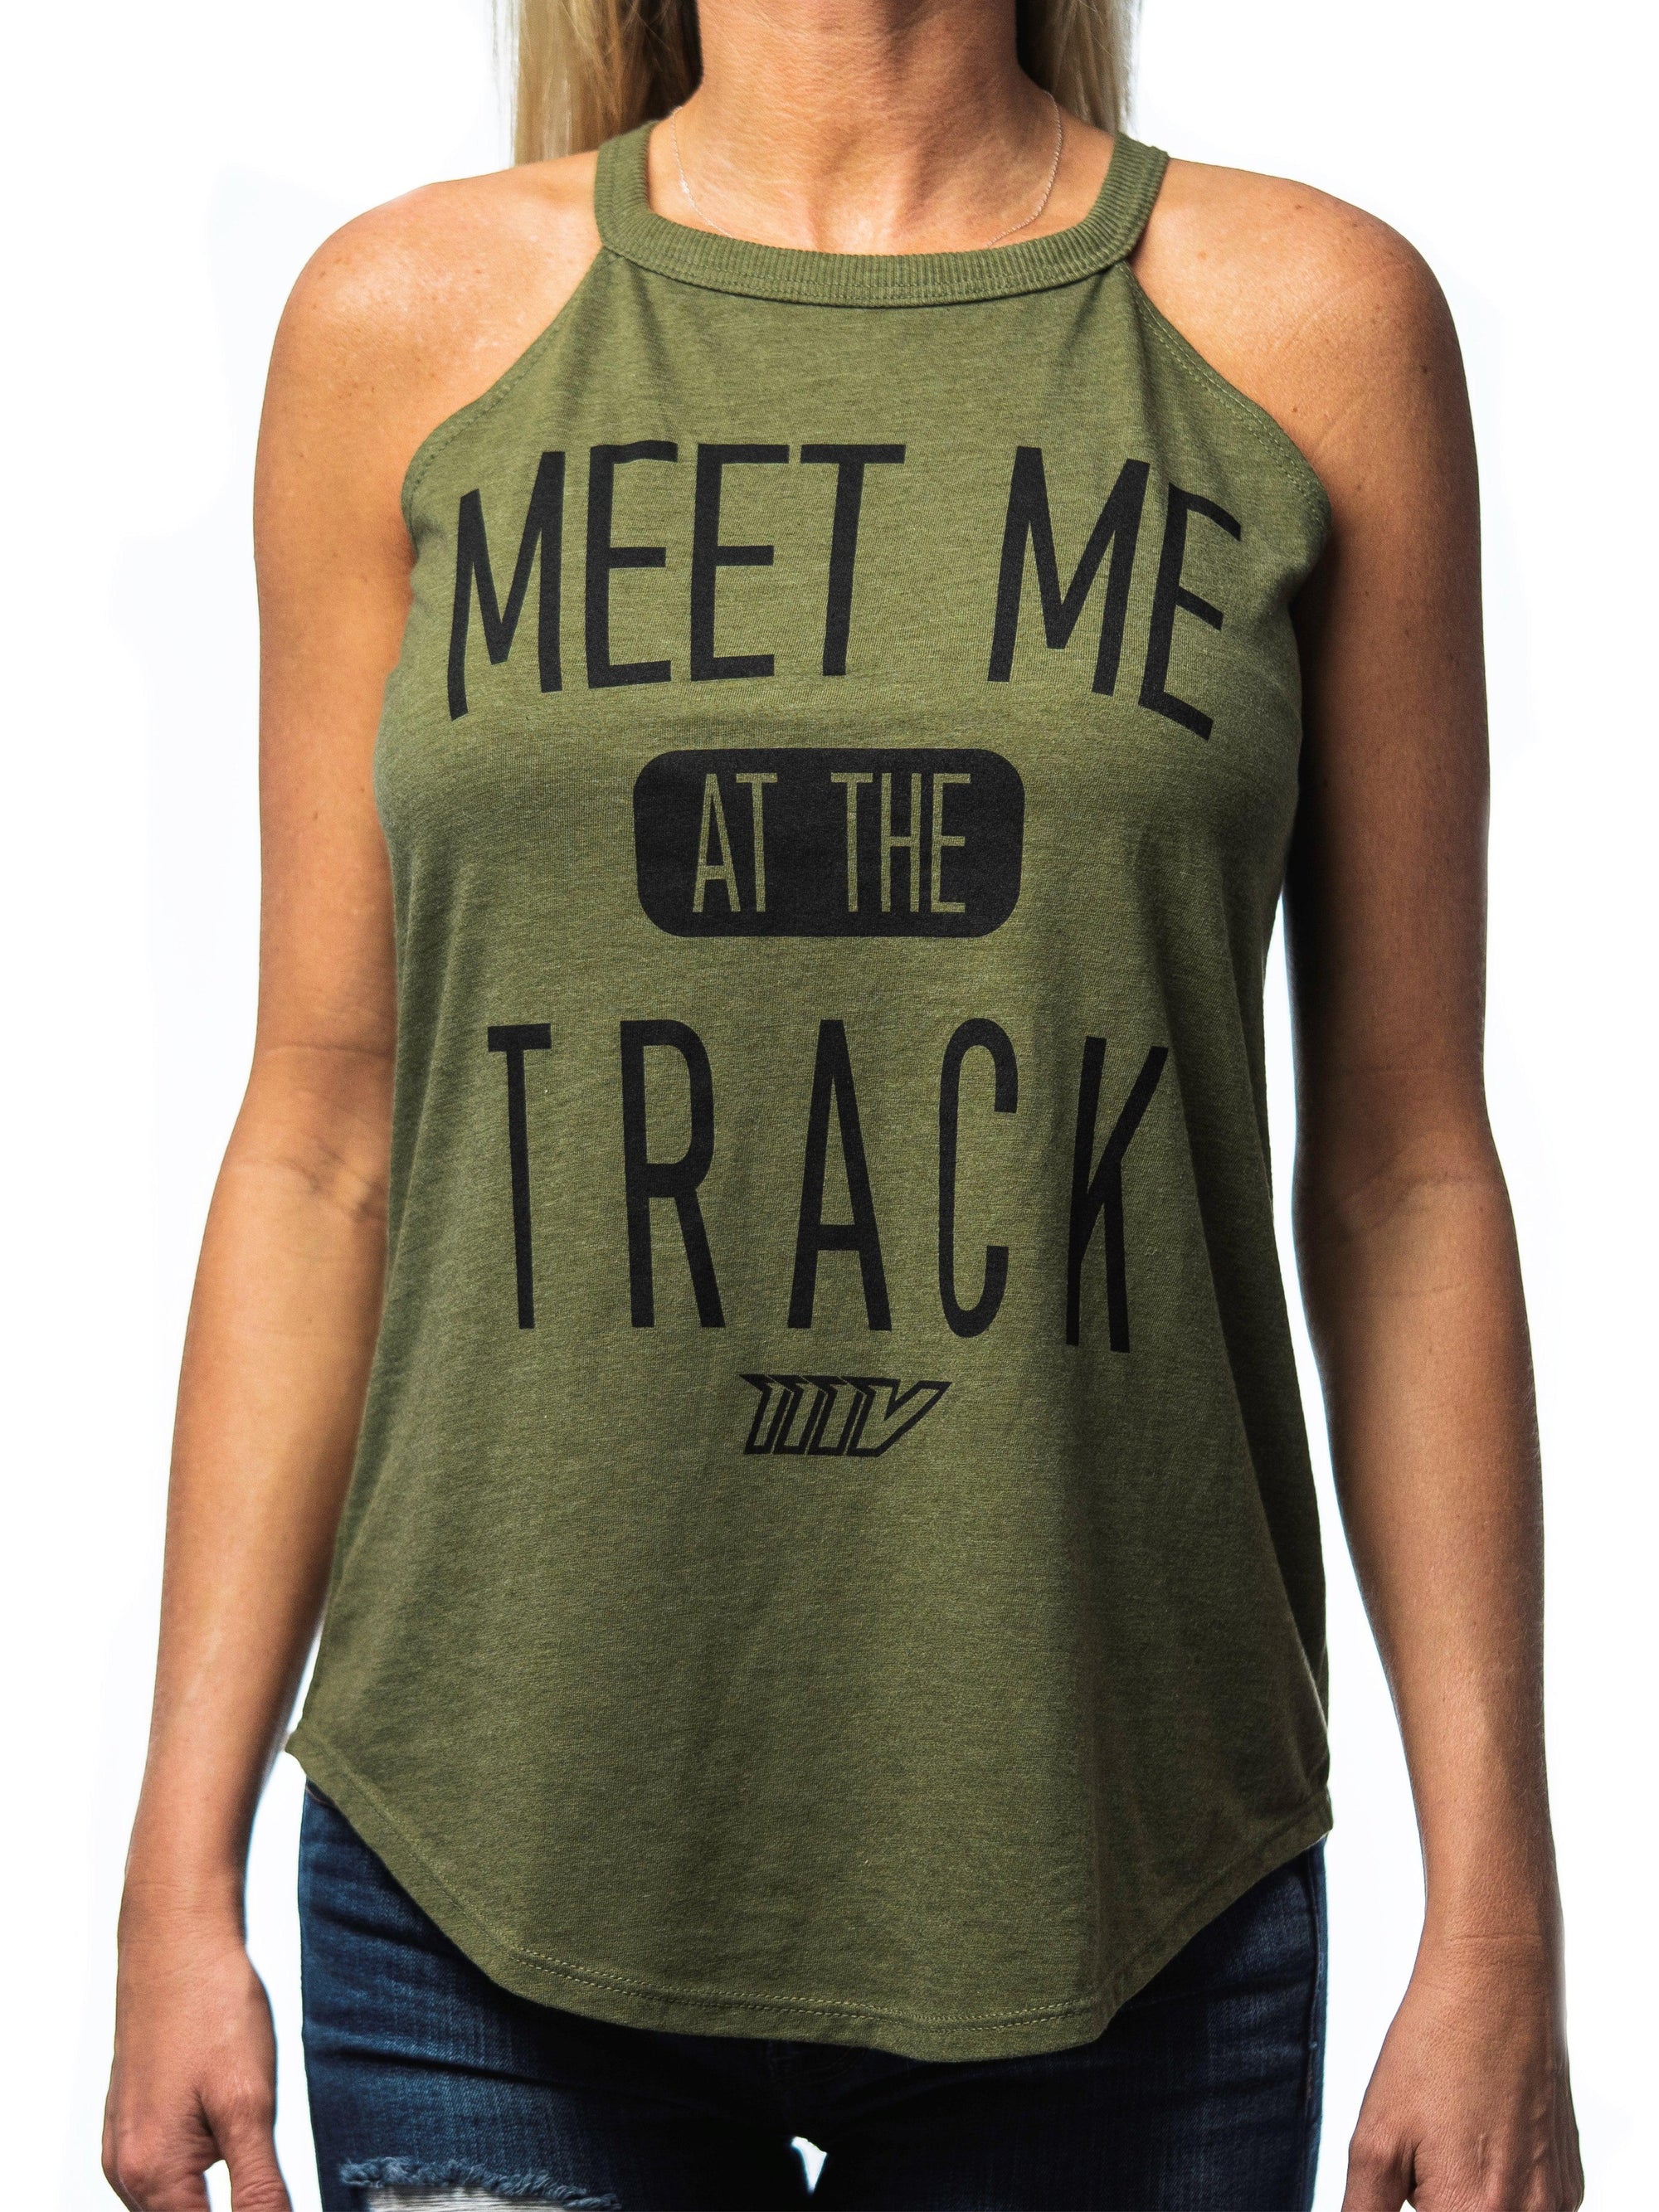 Front view of woman wearing a green tank top that says “MEET ME AT THE TRACK”